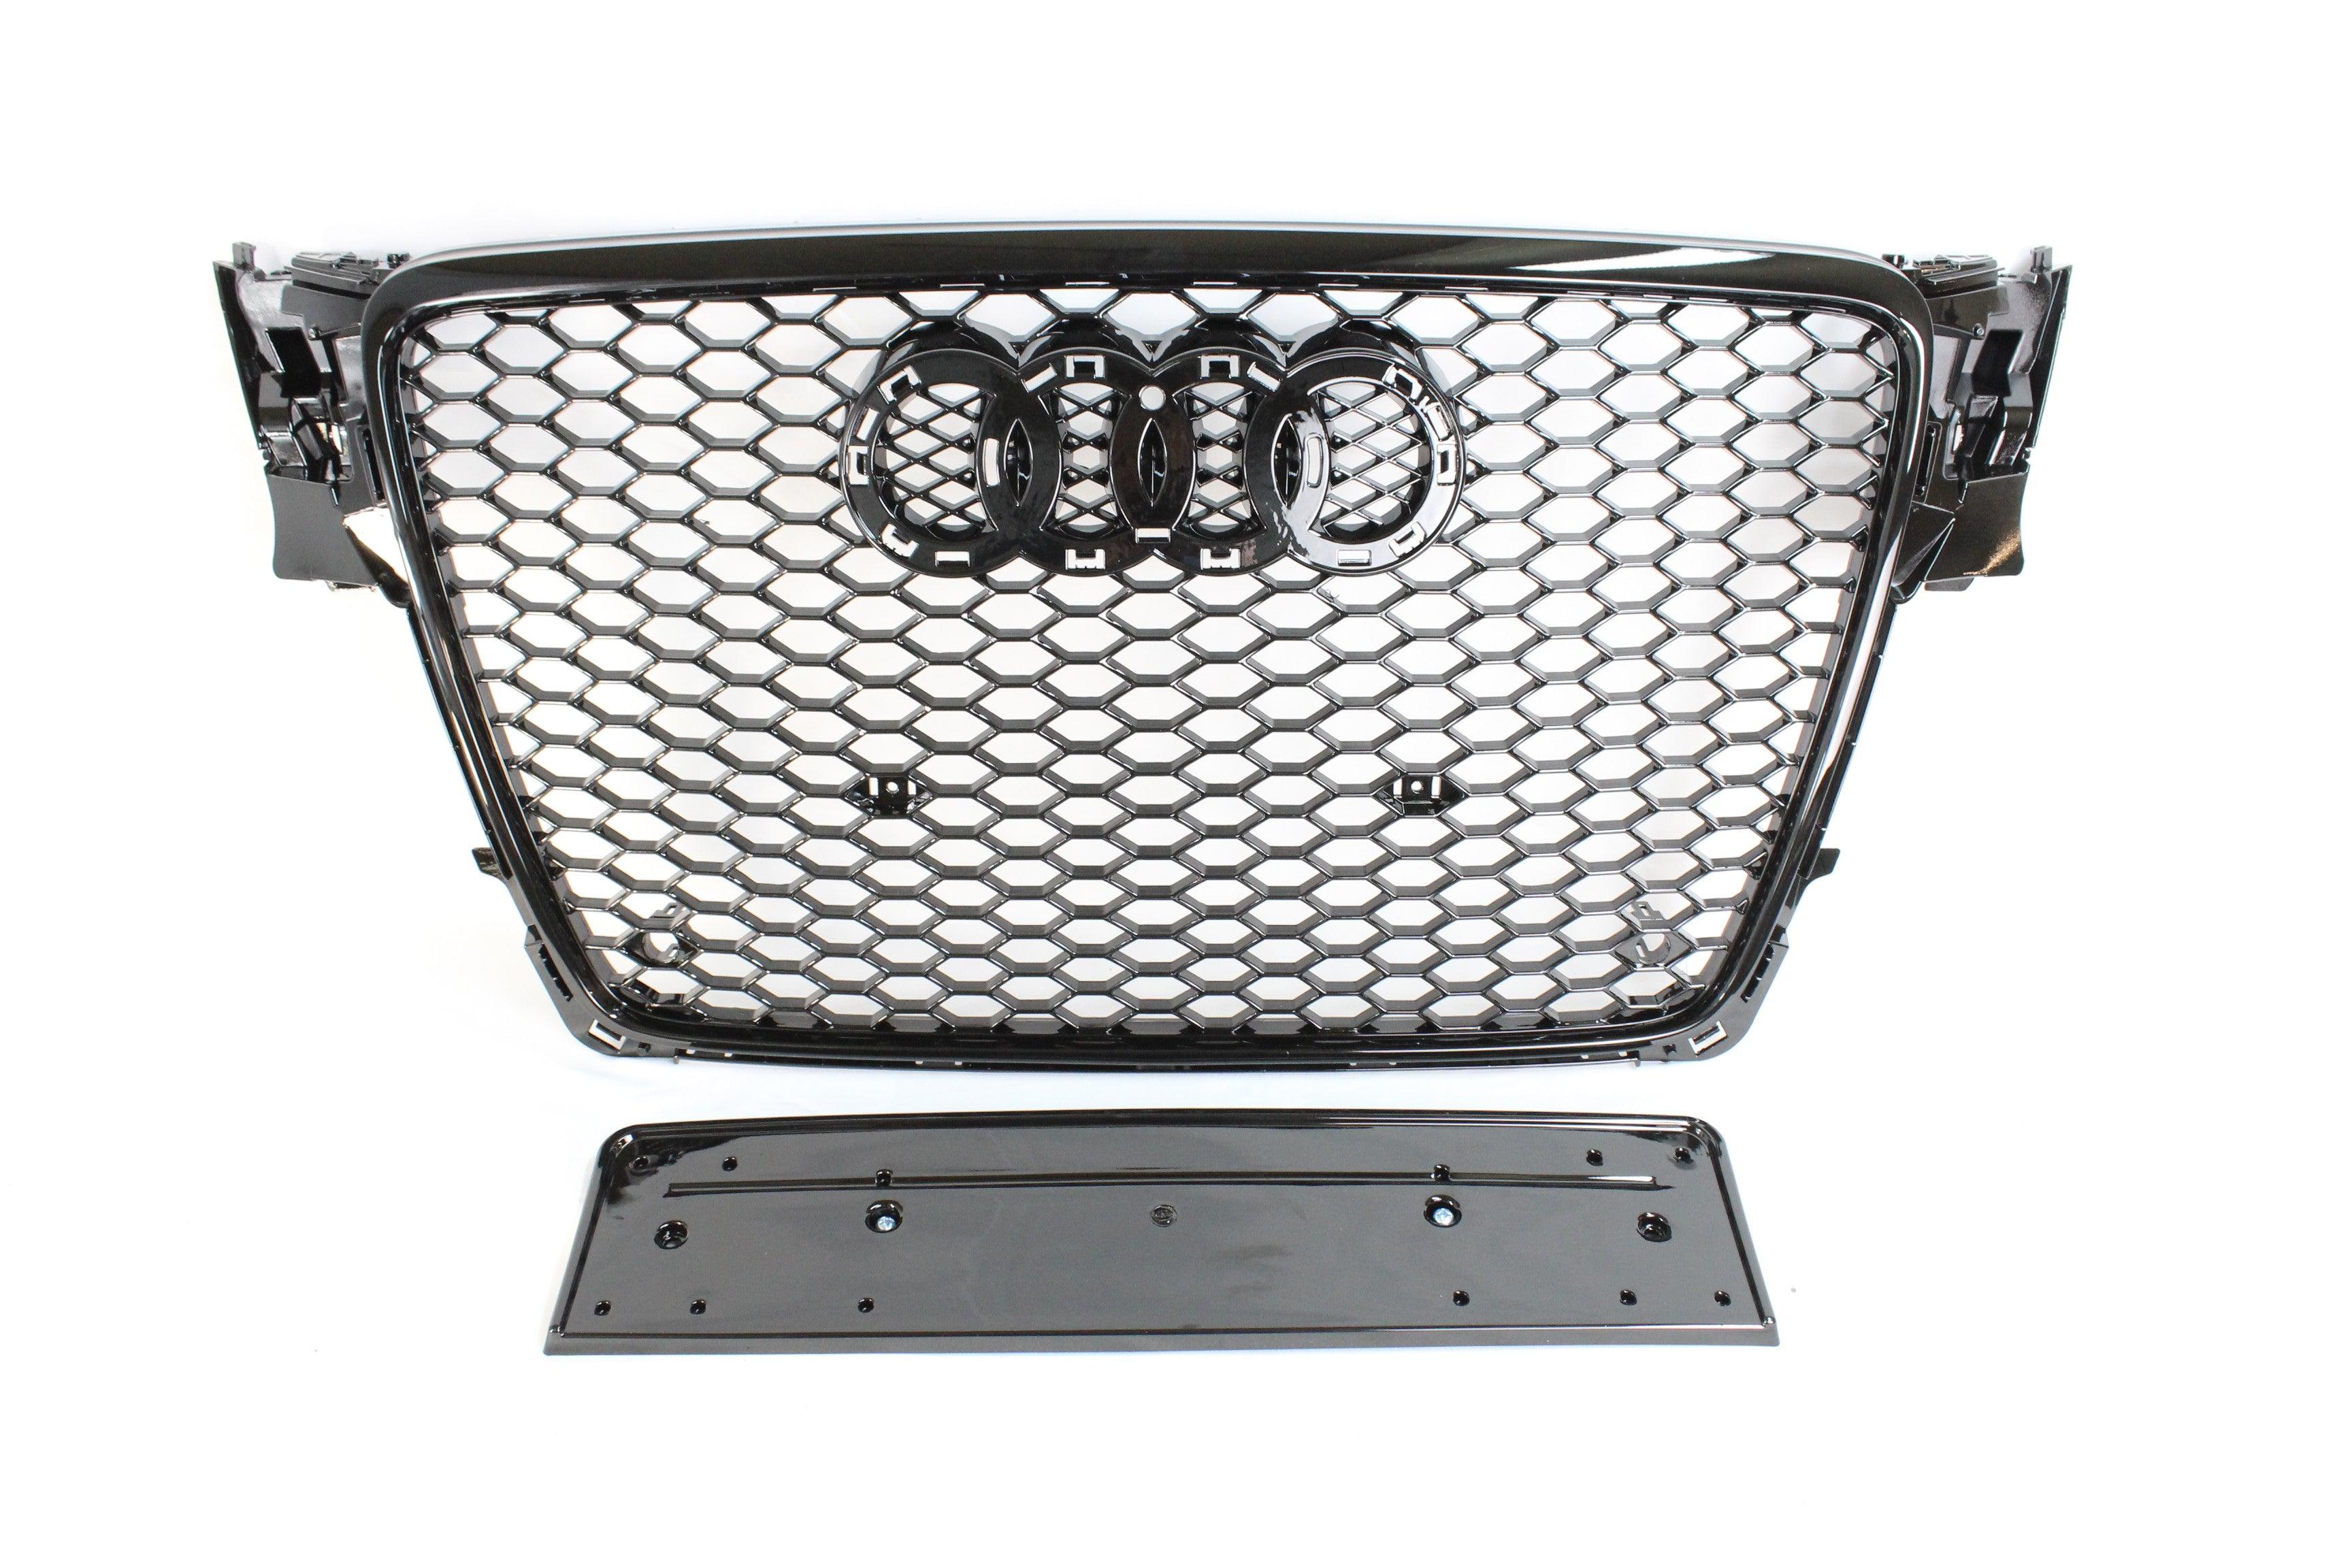 AUDI A4 S4 B8 2008-2012 ALL BLACK HONEYCOMB GRILL - BLAK BY CT CARBON - CT Carbon